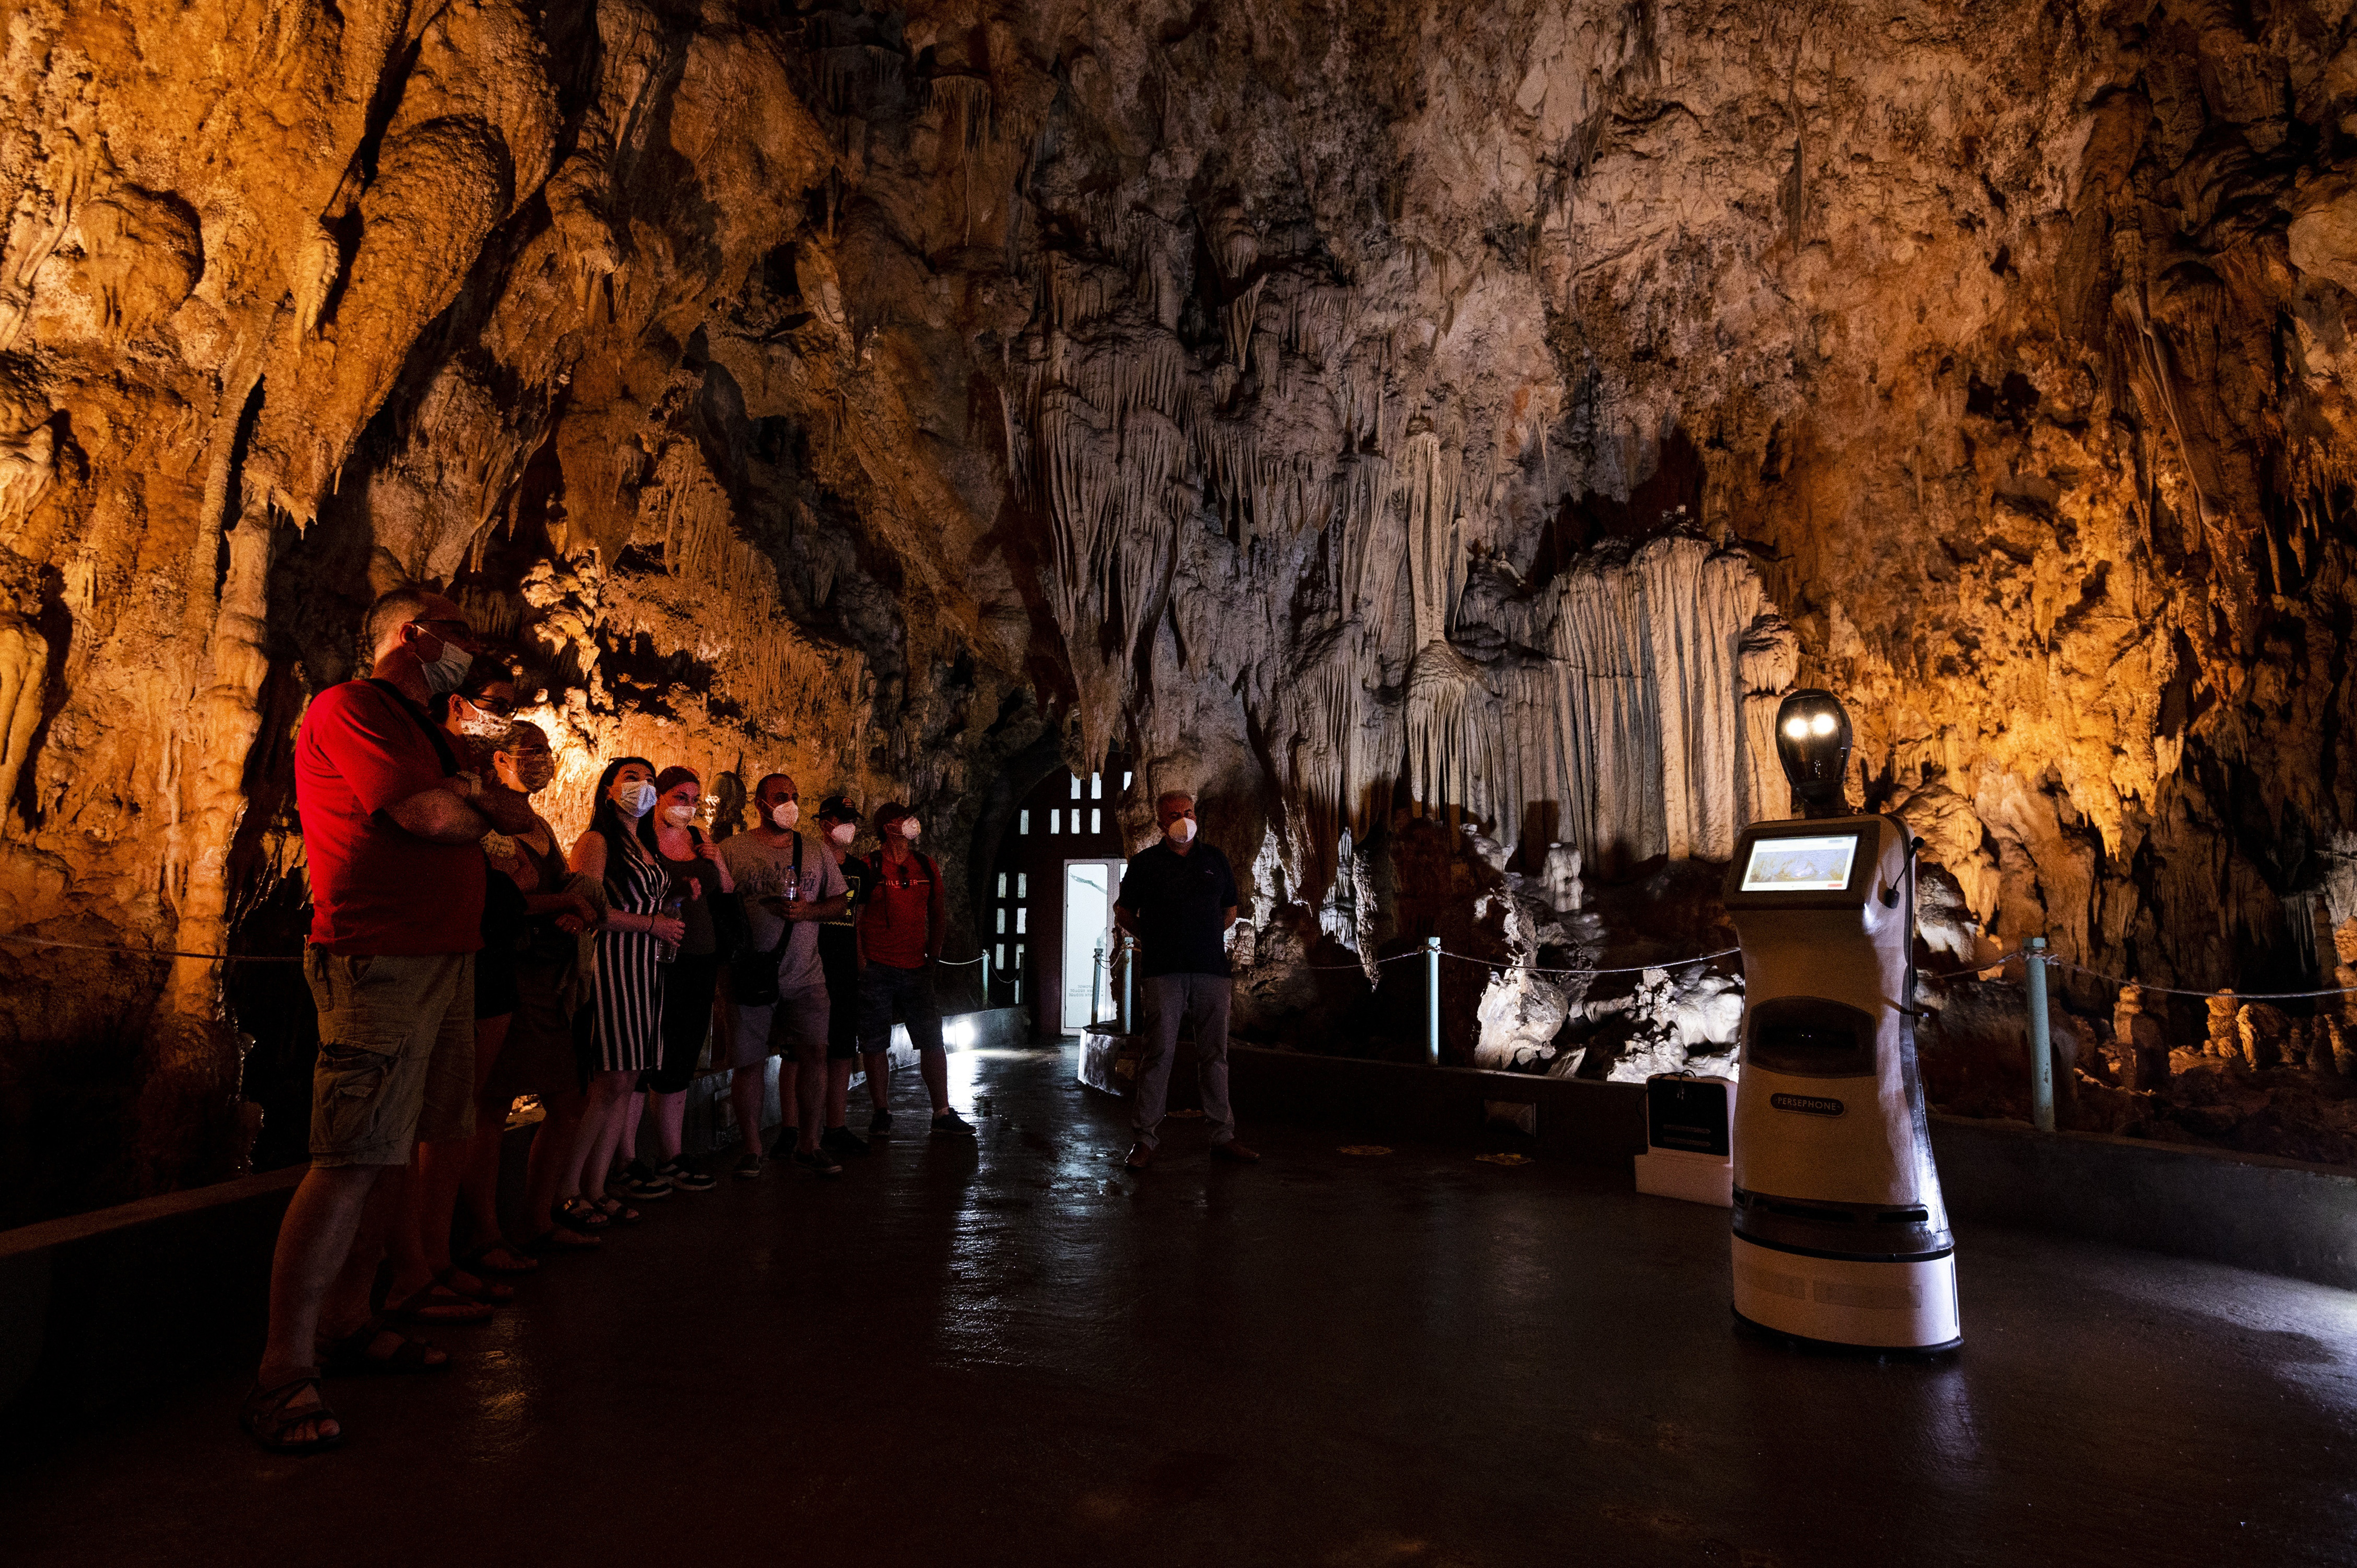 Persephone, the Robot Guide, Leads Visitors in a Greek Cave